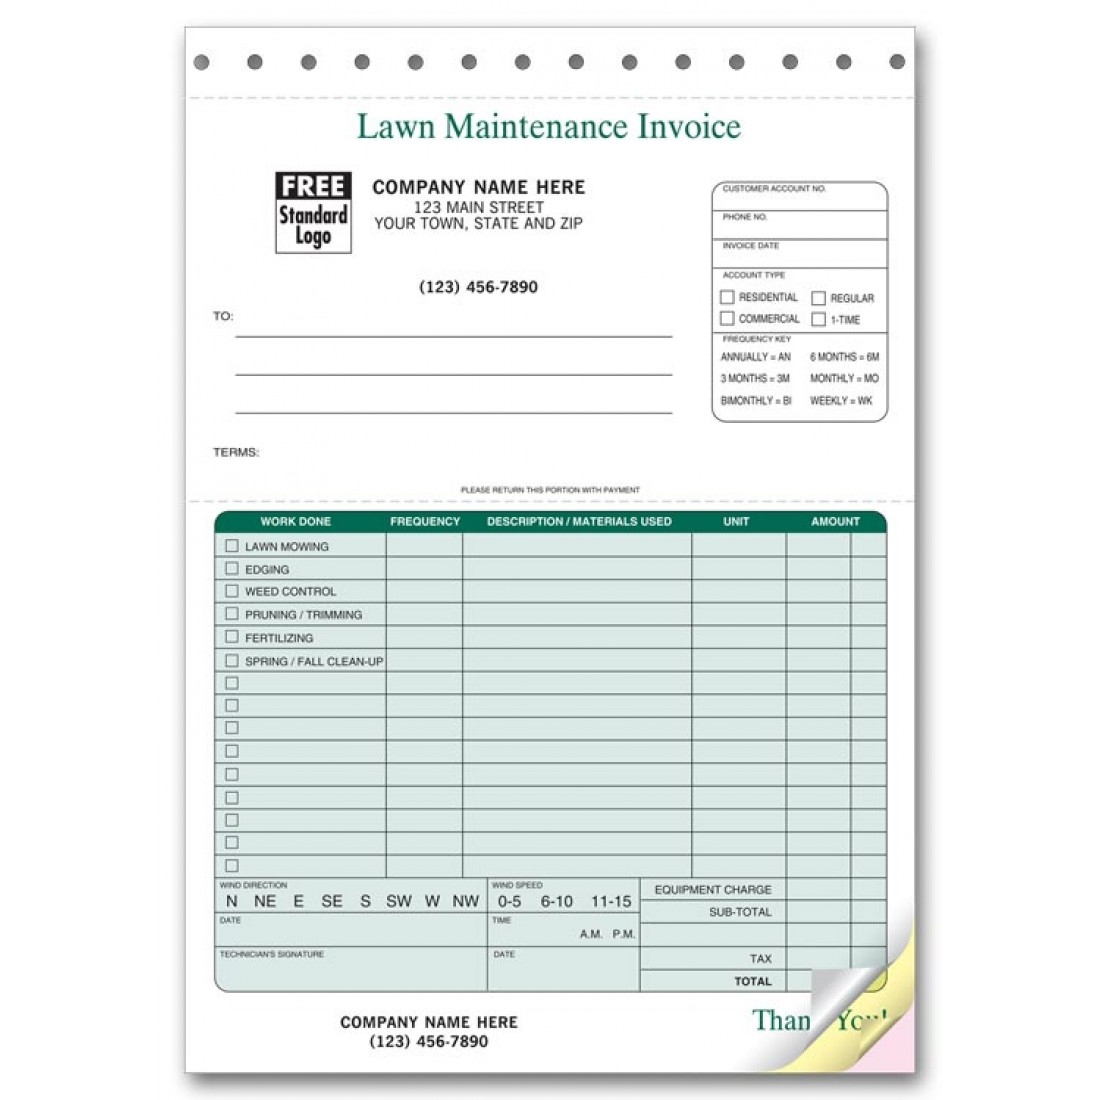 Lawn Care Invoice Template Word